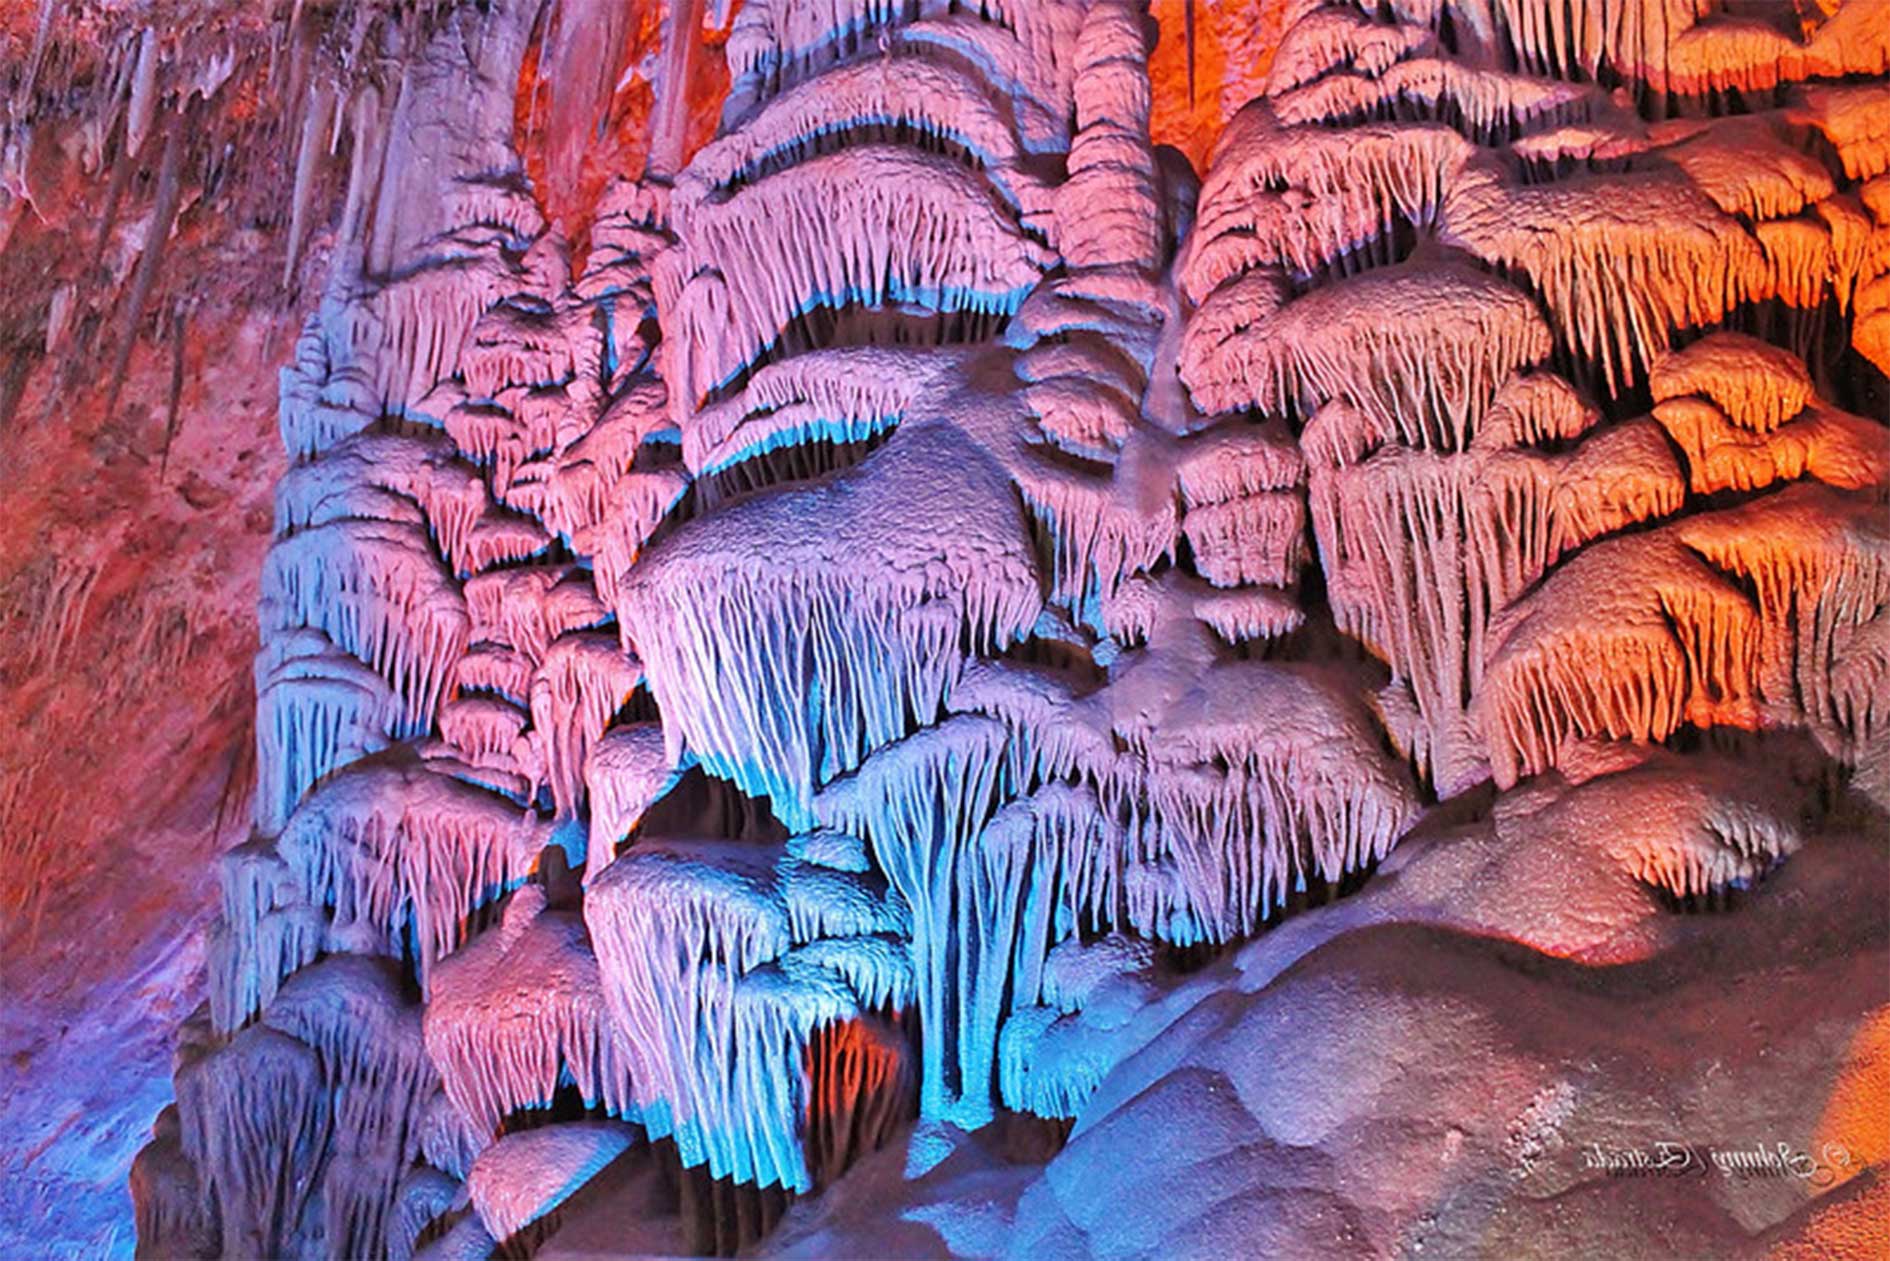 Stalactites in Stalactite Caves